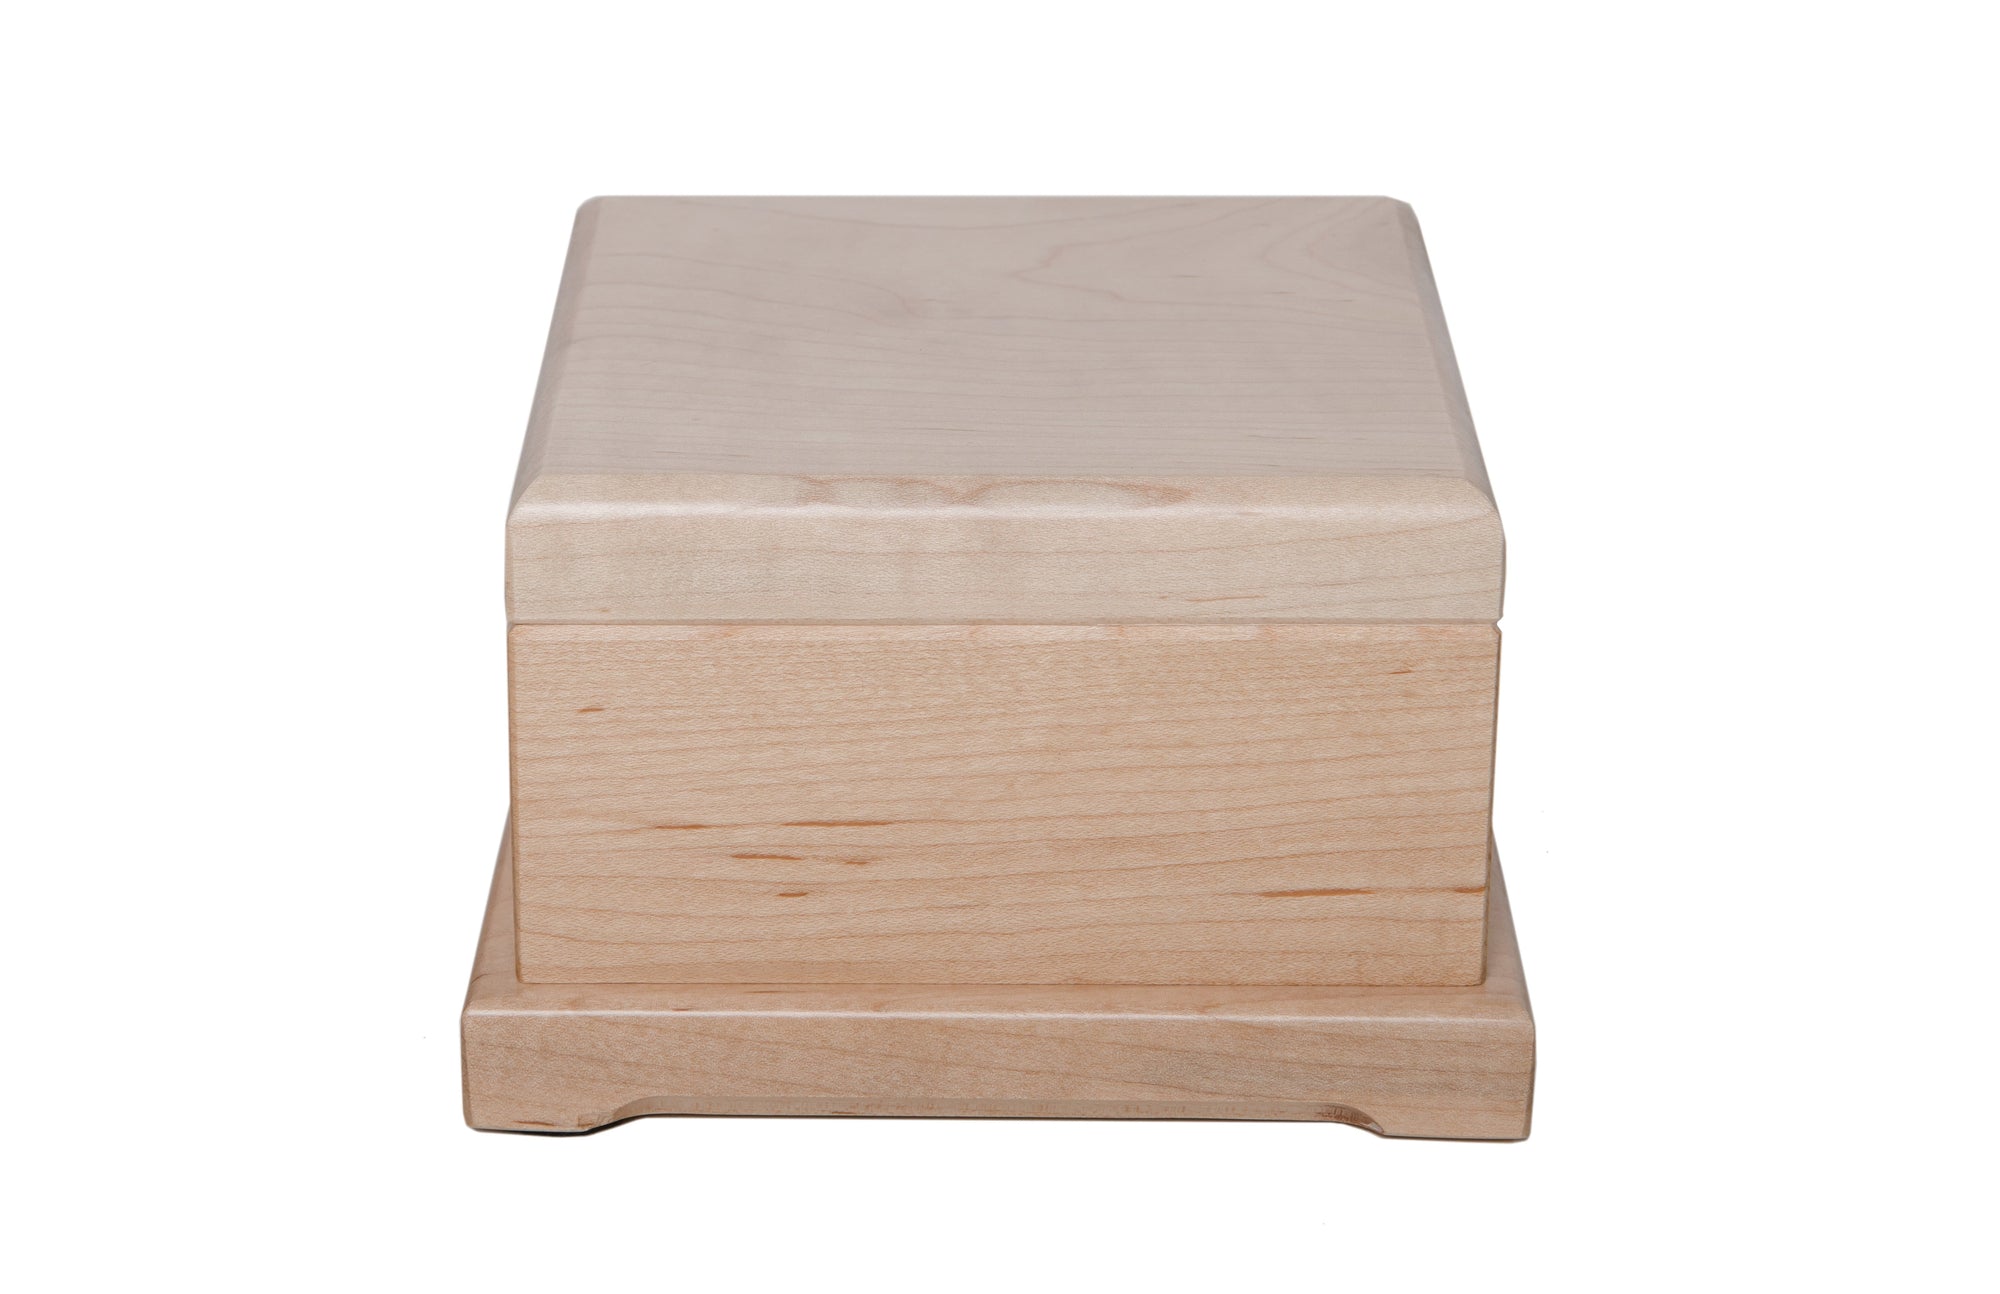 Pet Memorial Keepsake Urn Box for Dog or Cat - A Limb Has Fallen From Our Family Tree